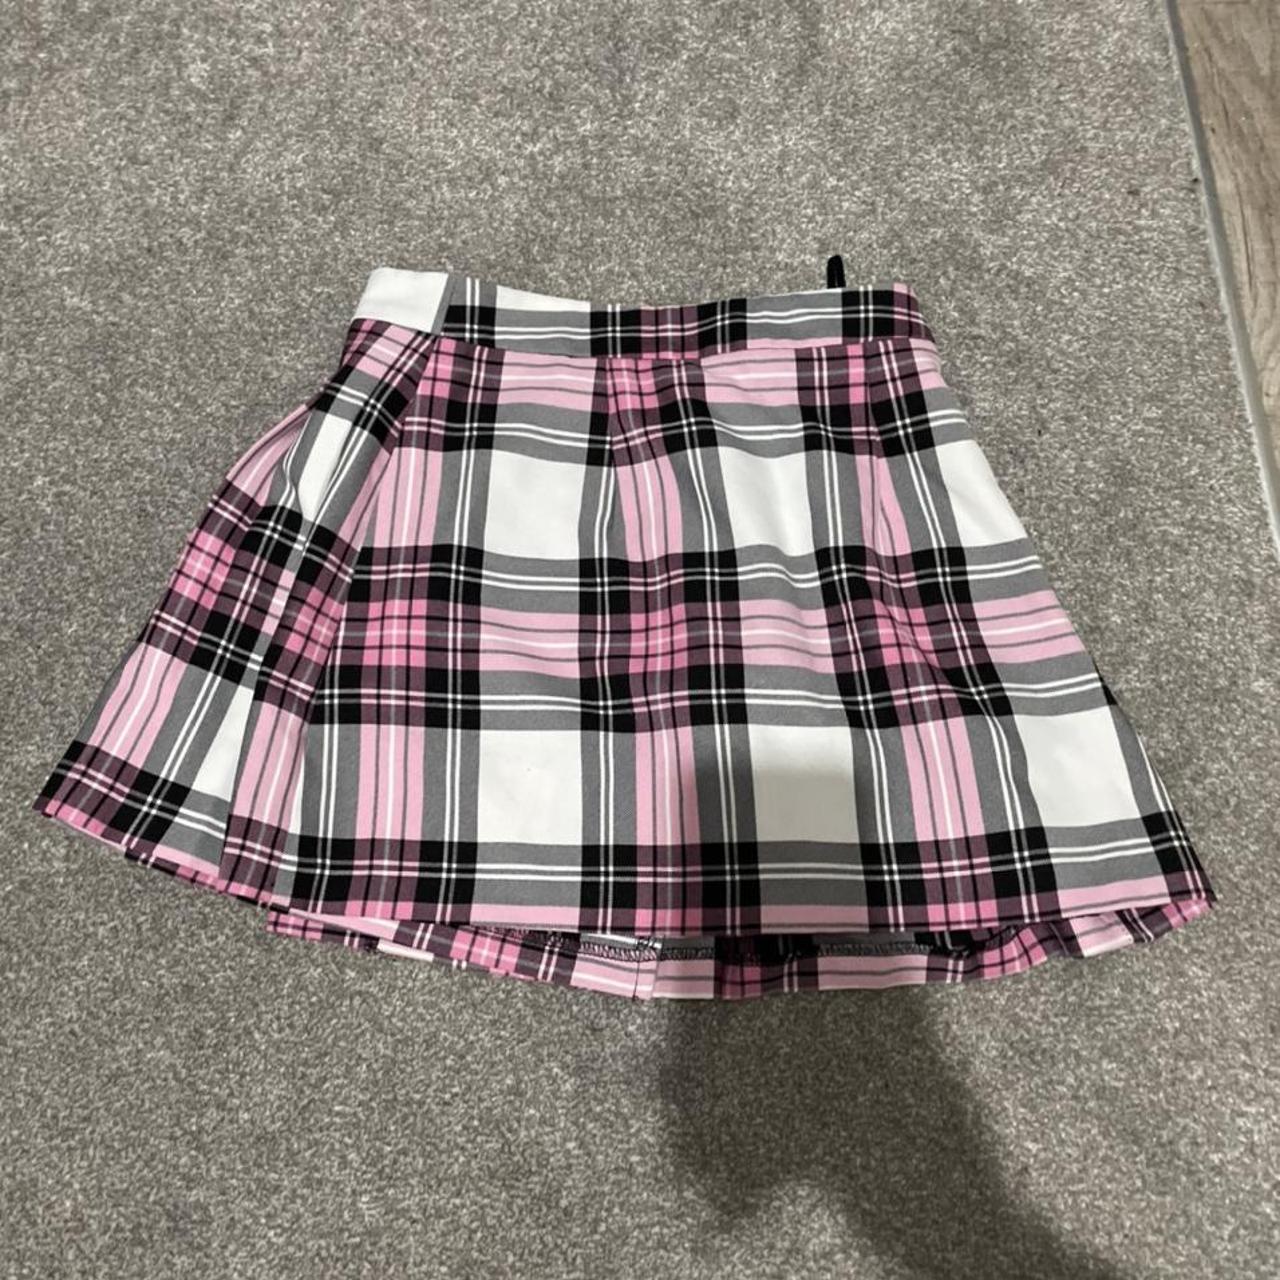 Topshop Women's White and Pink Skirt | Depop